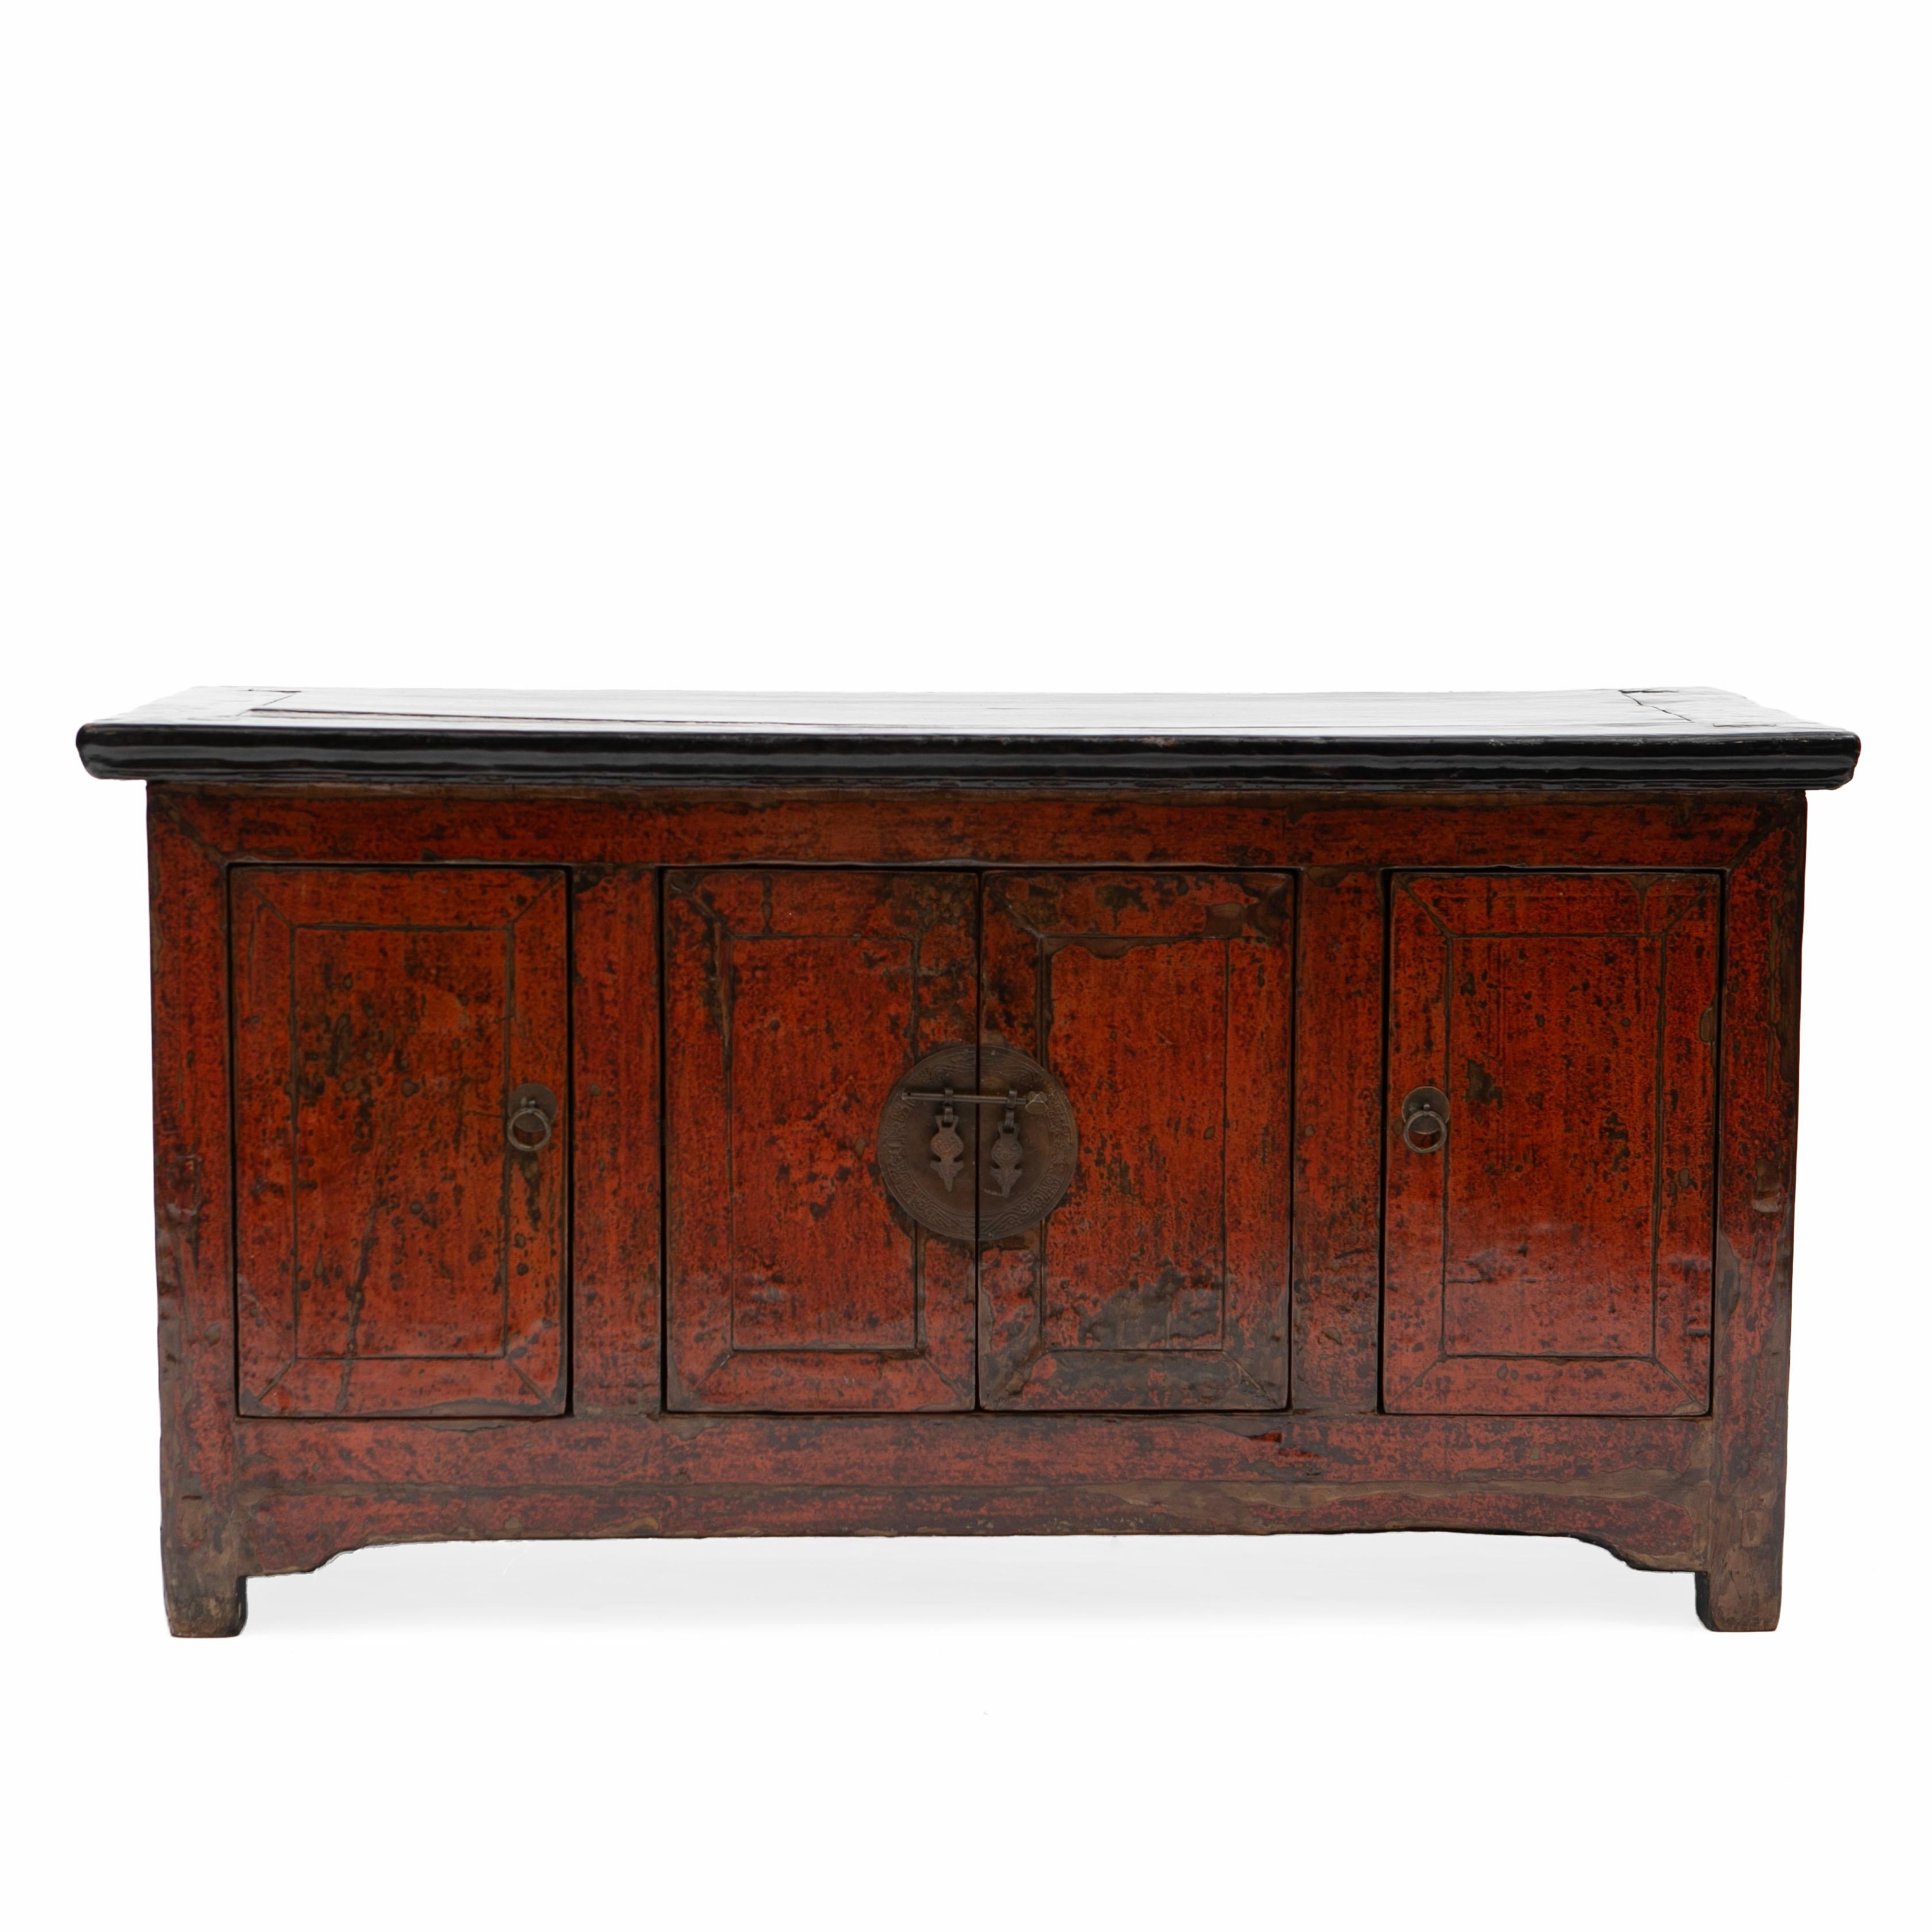 Low sideboard (kang sideboard) from the Qing period in elm wood with original red lacquer on the front, black lacquer on the sides.
Front with double doors in the middle adorned with round metal fittings, flanked by a door on each side.
The